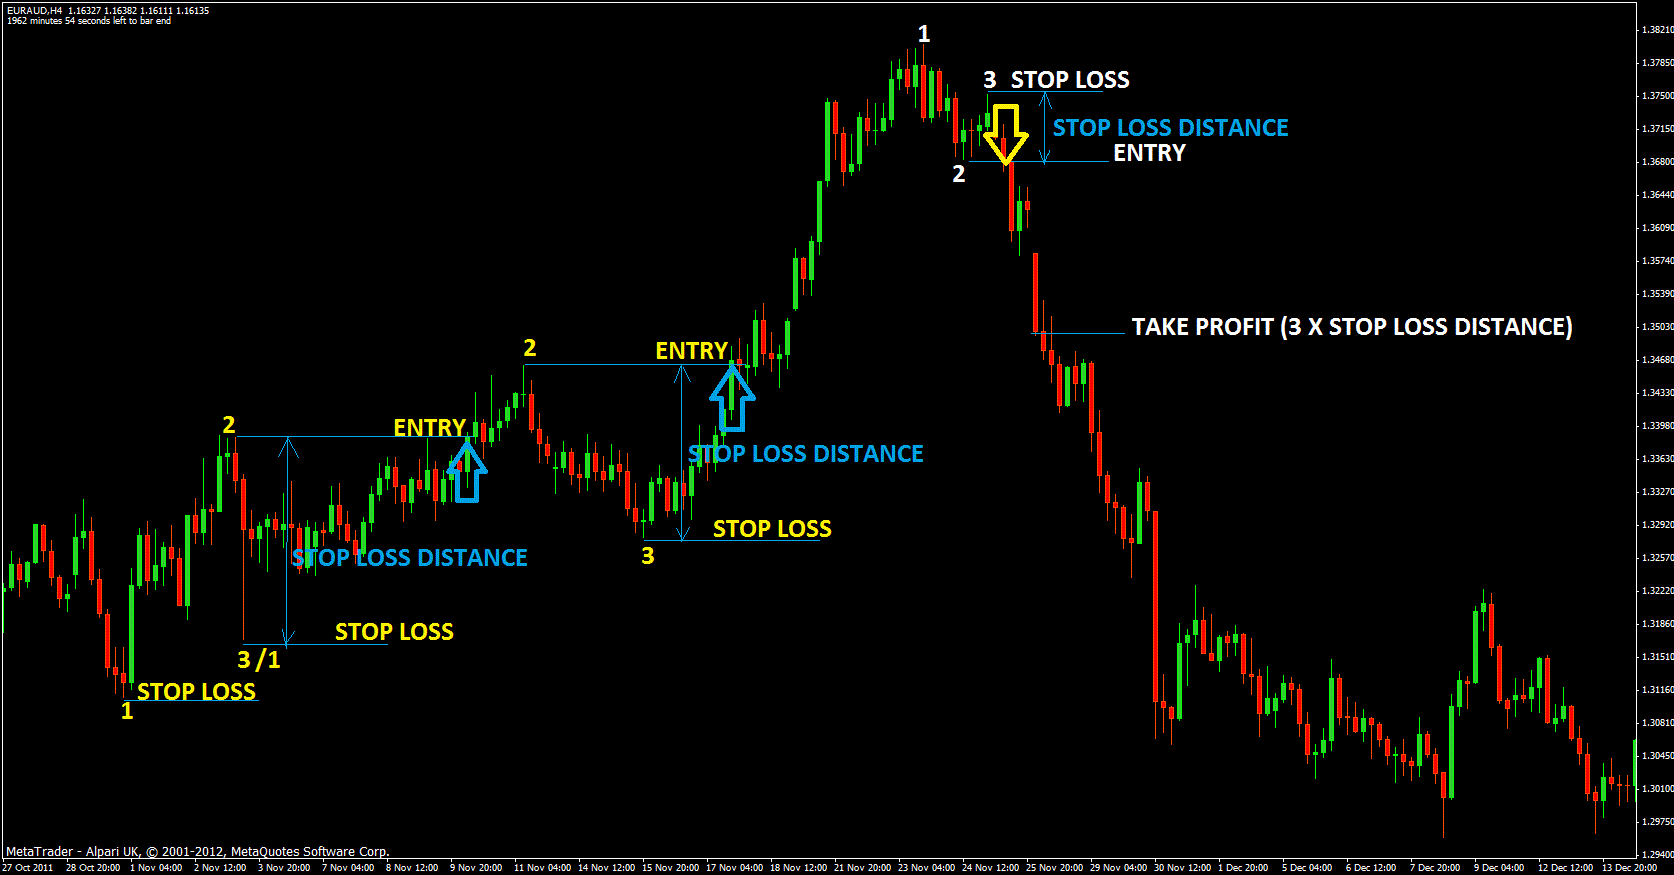 Short term forex trading tips and tricks